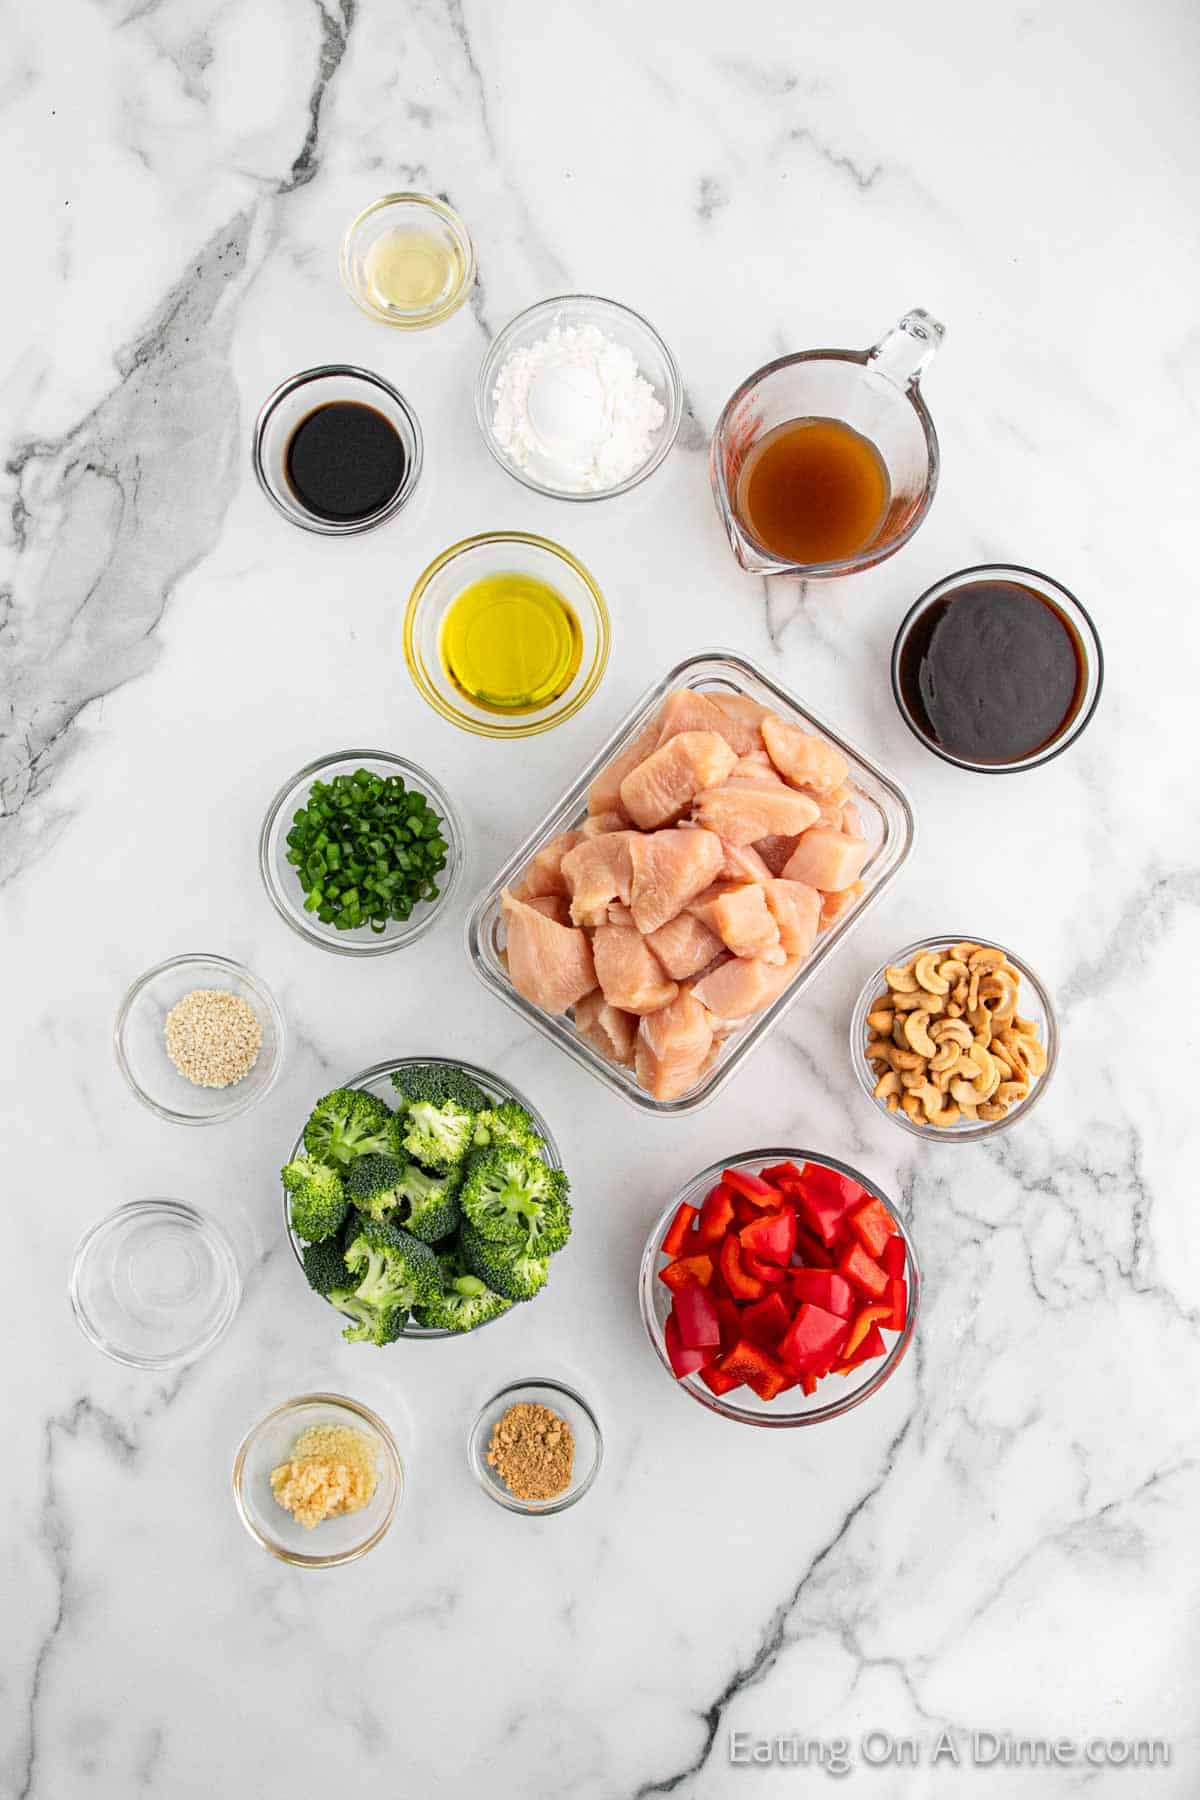 Cashew Chicken Ingredients - Chicken breasts diced into pieces, cornstarch, olive oil, chicken broth, hoisin sauce, soy sauce, rice vinegar, sesame oil, minced garlic, ground ginger, broccoli, red bell pepper, cashew halves, green onions, sesame seeds